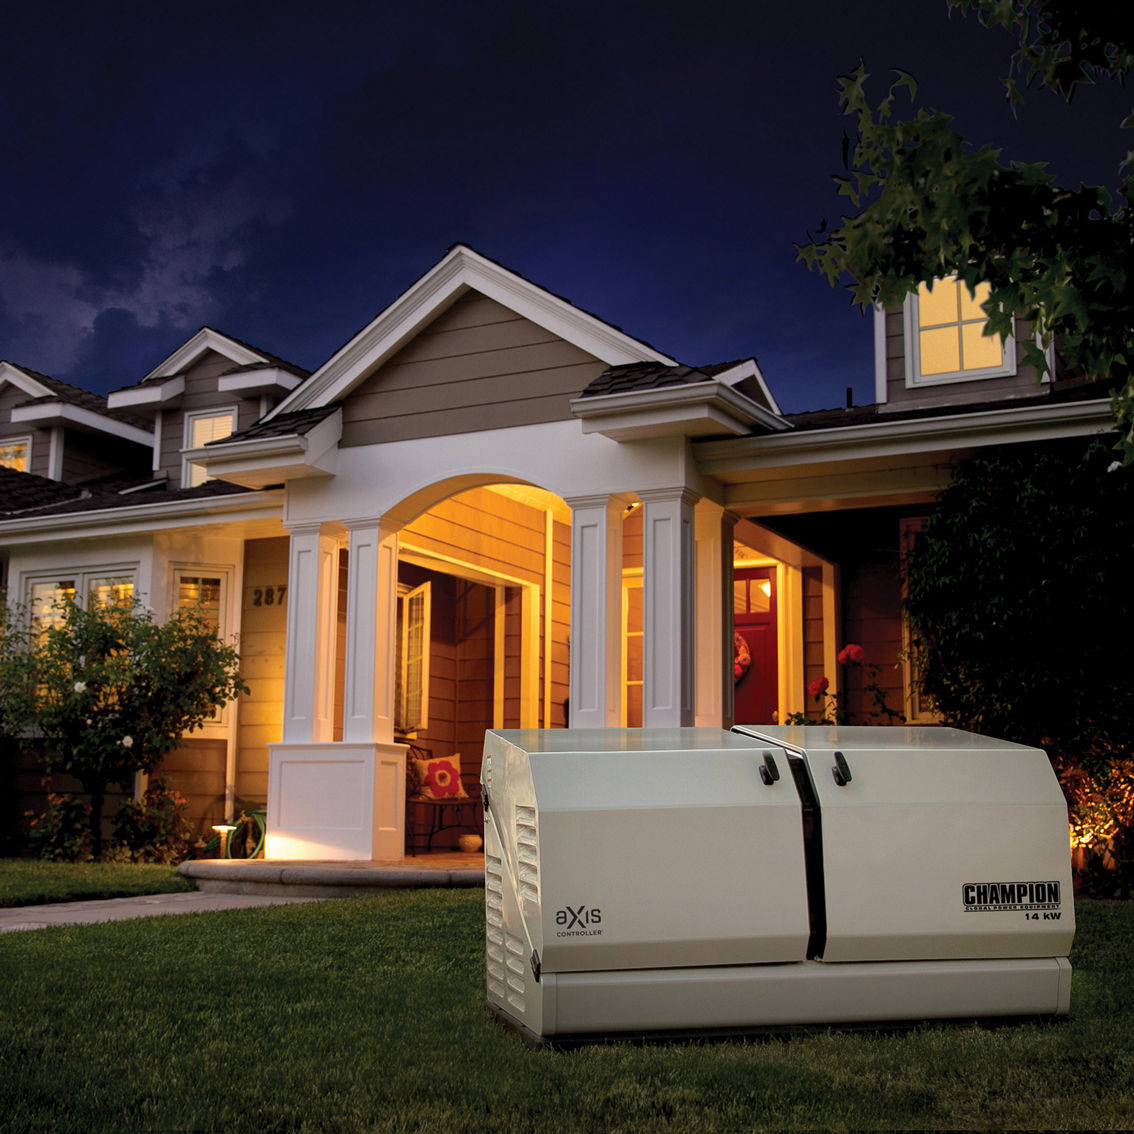 Champion 14kW aXis Home Standby Generator System with 100-Amp Auto Transfer Switch - Image 4 of 8